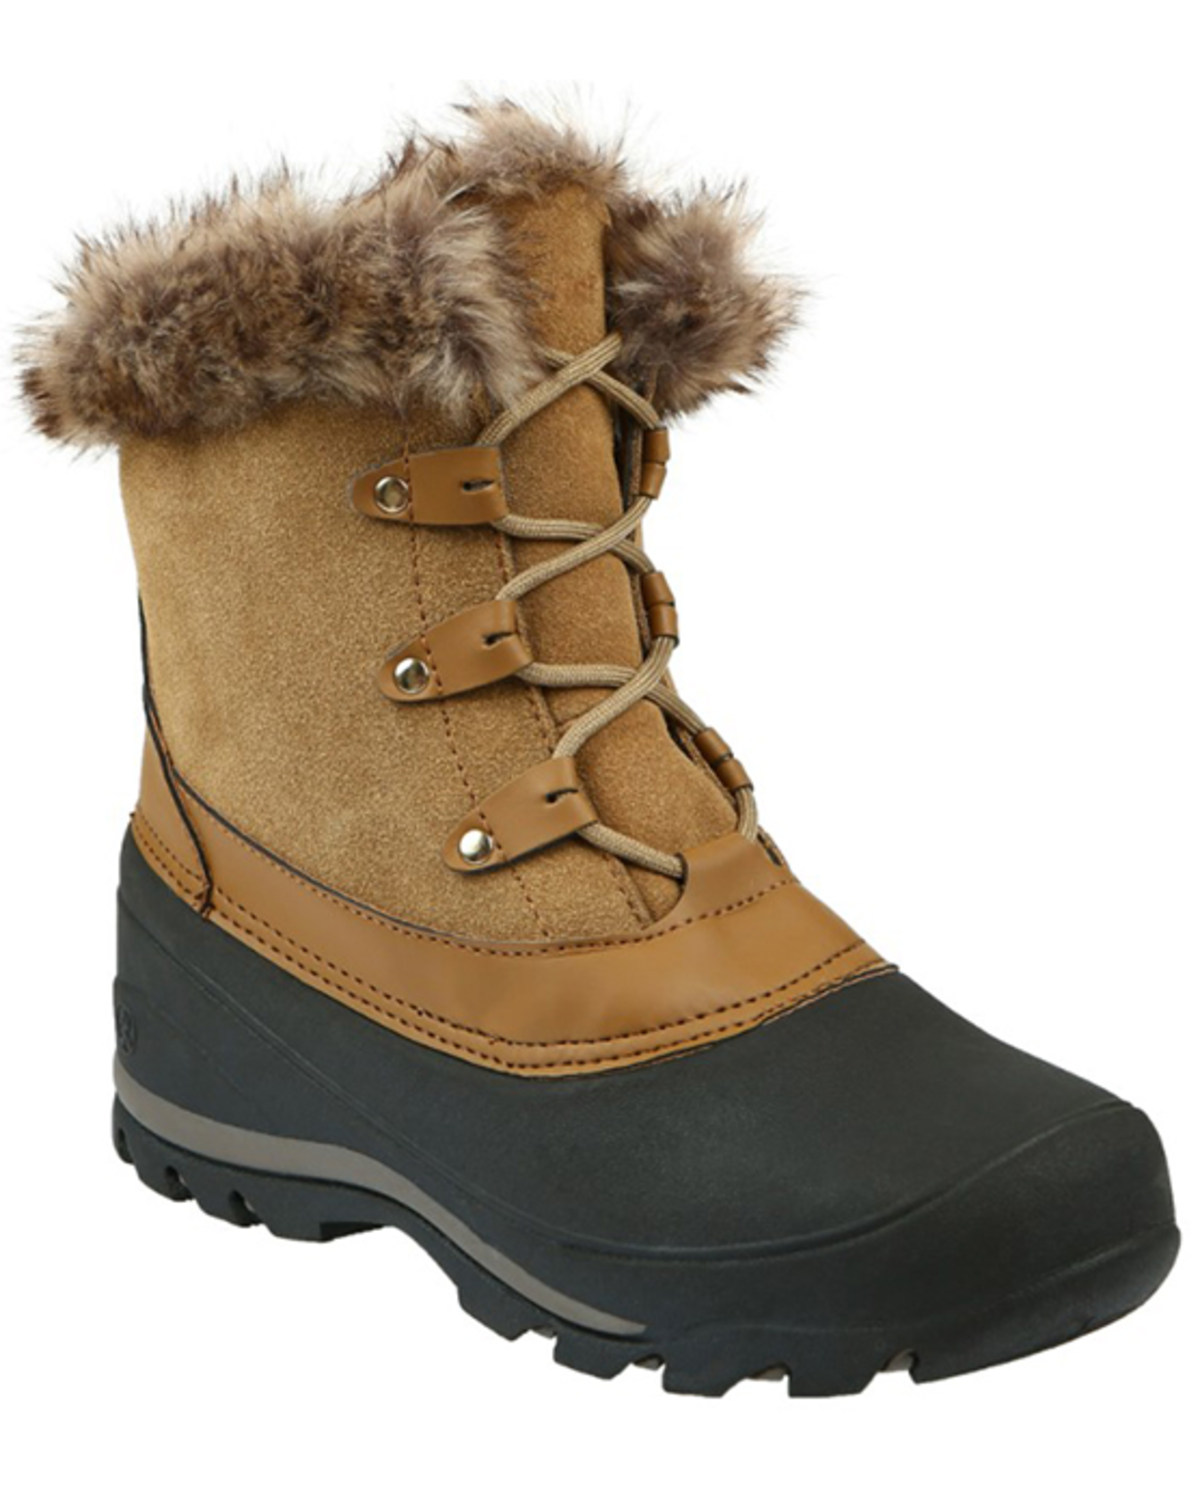 Northside Women's Fairfield Insulated Winter Snow Boots - Round Toe